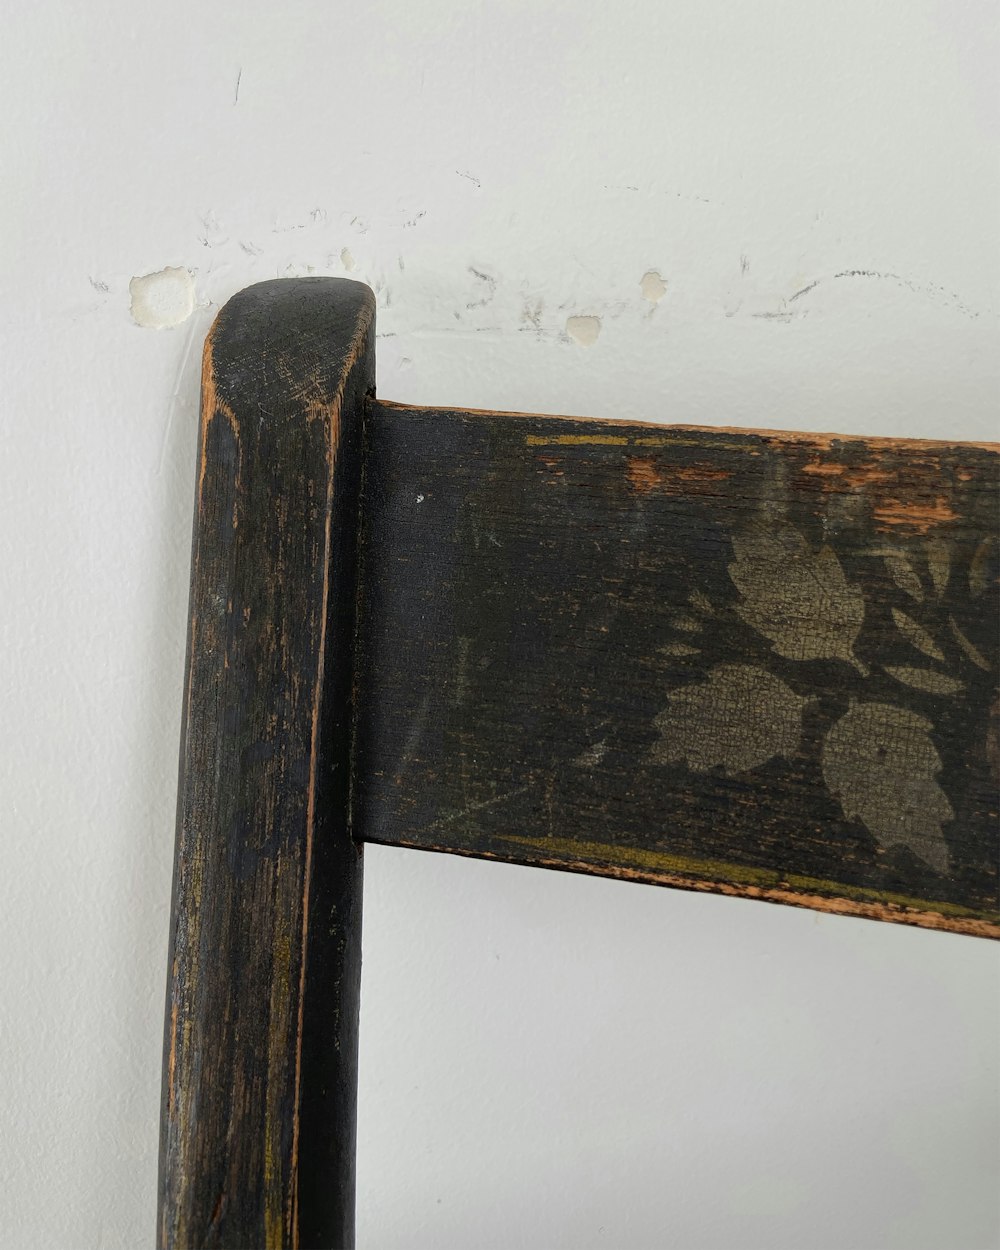 a close up of a wooden chair against a wall